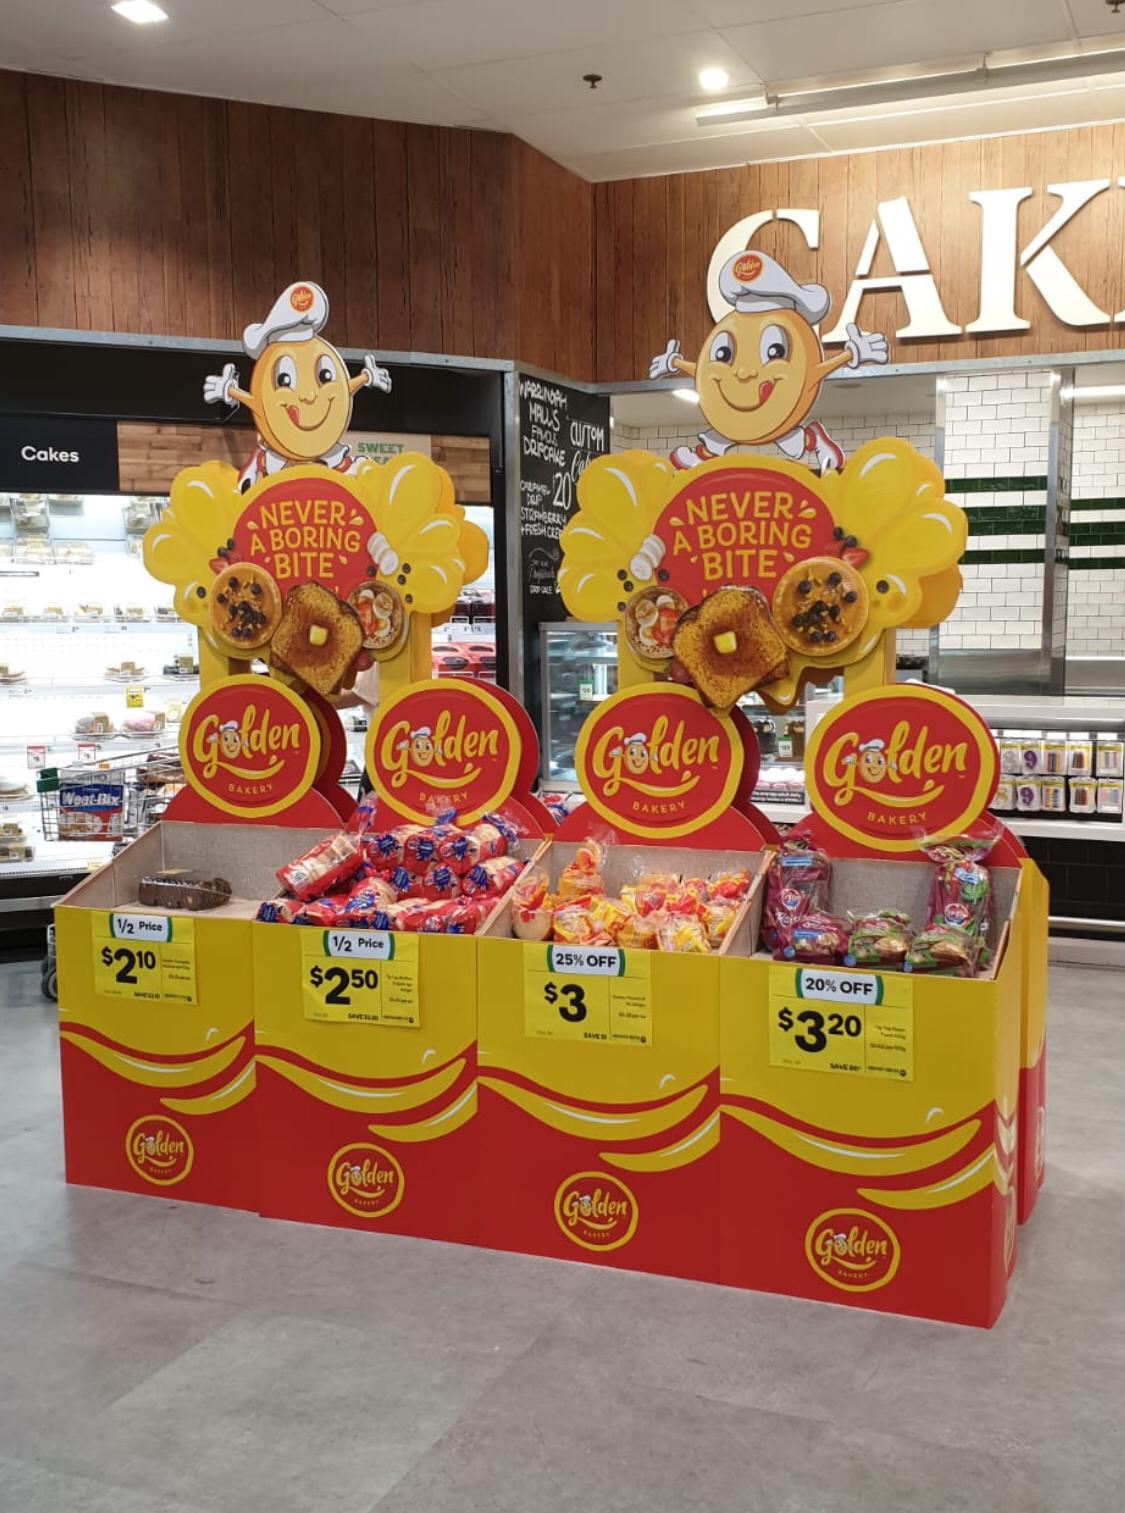 Golden Bakery retail display stands for various products